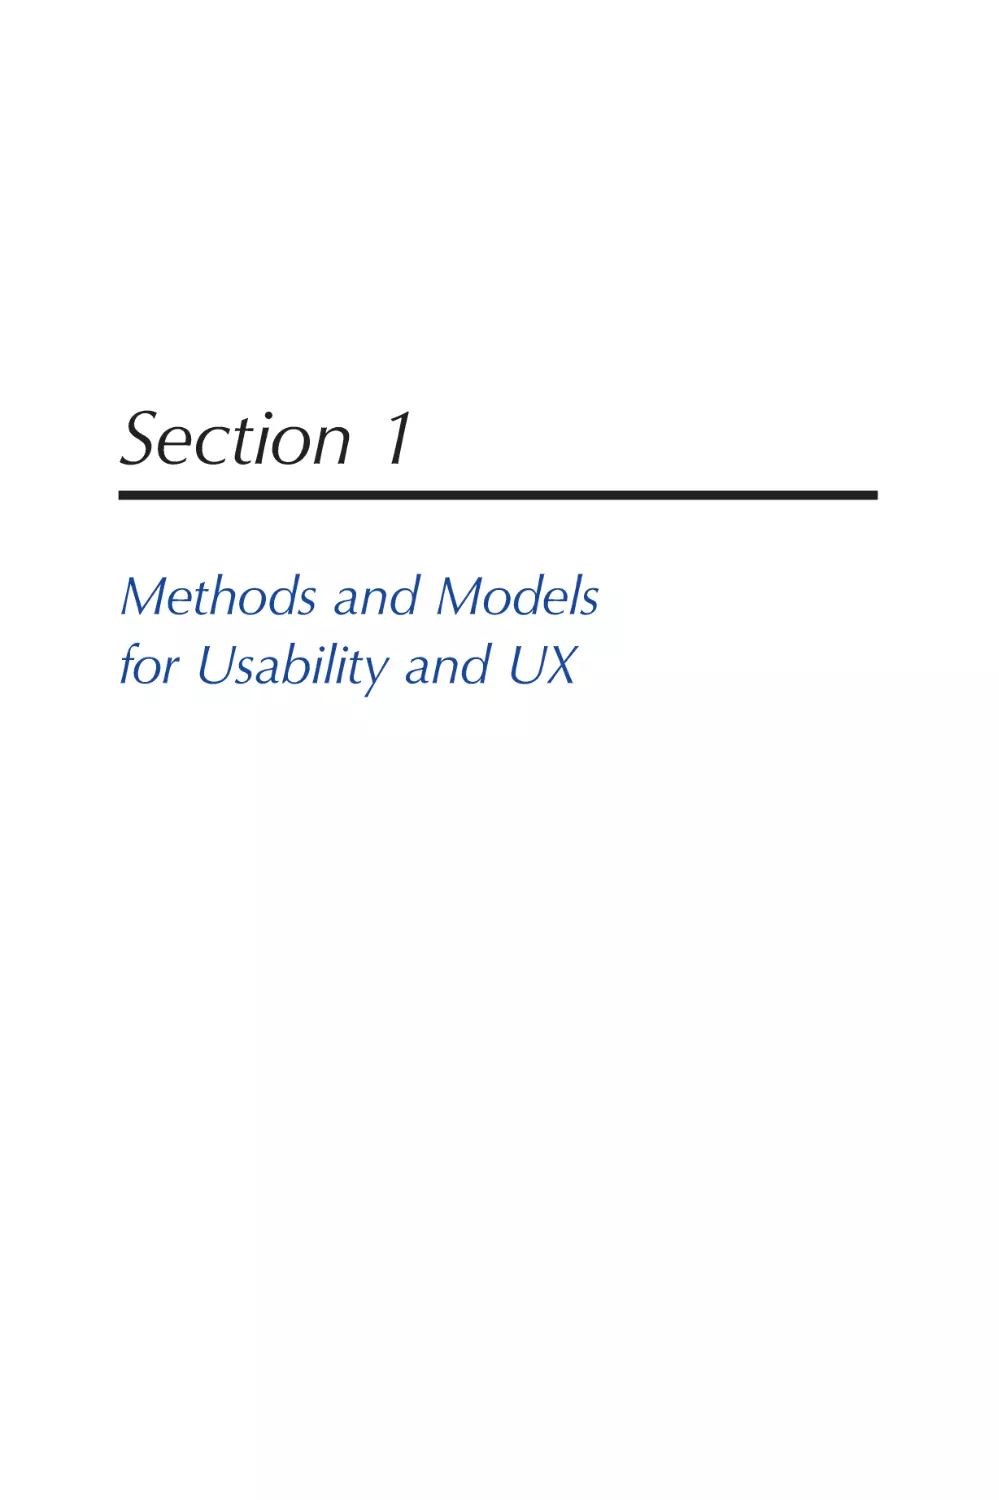 Section 1 Methods and Models for Usability and UX